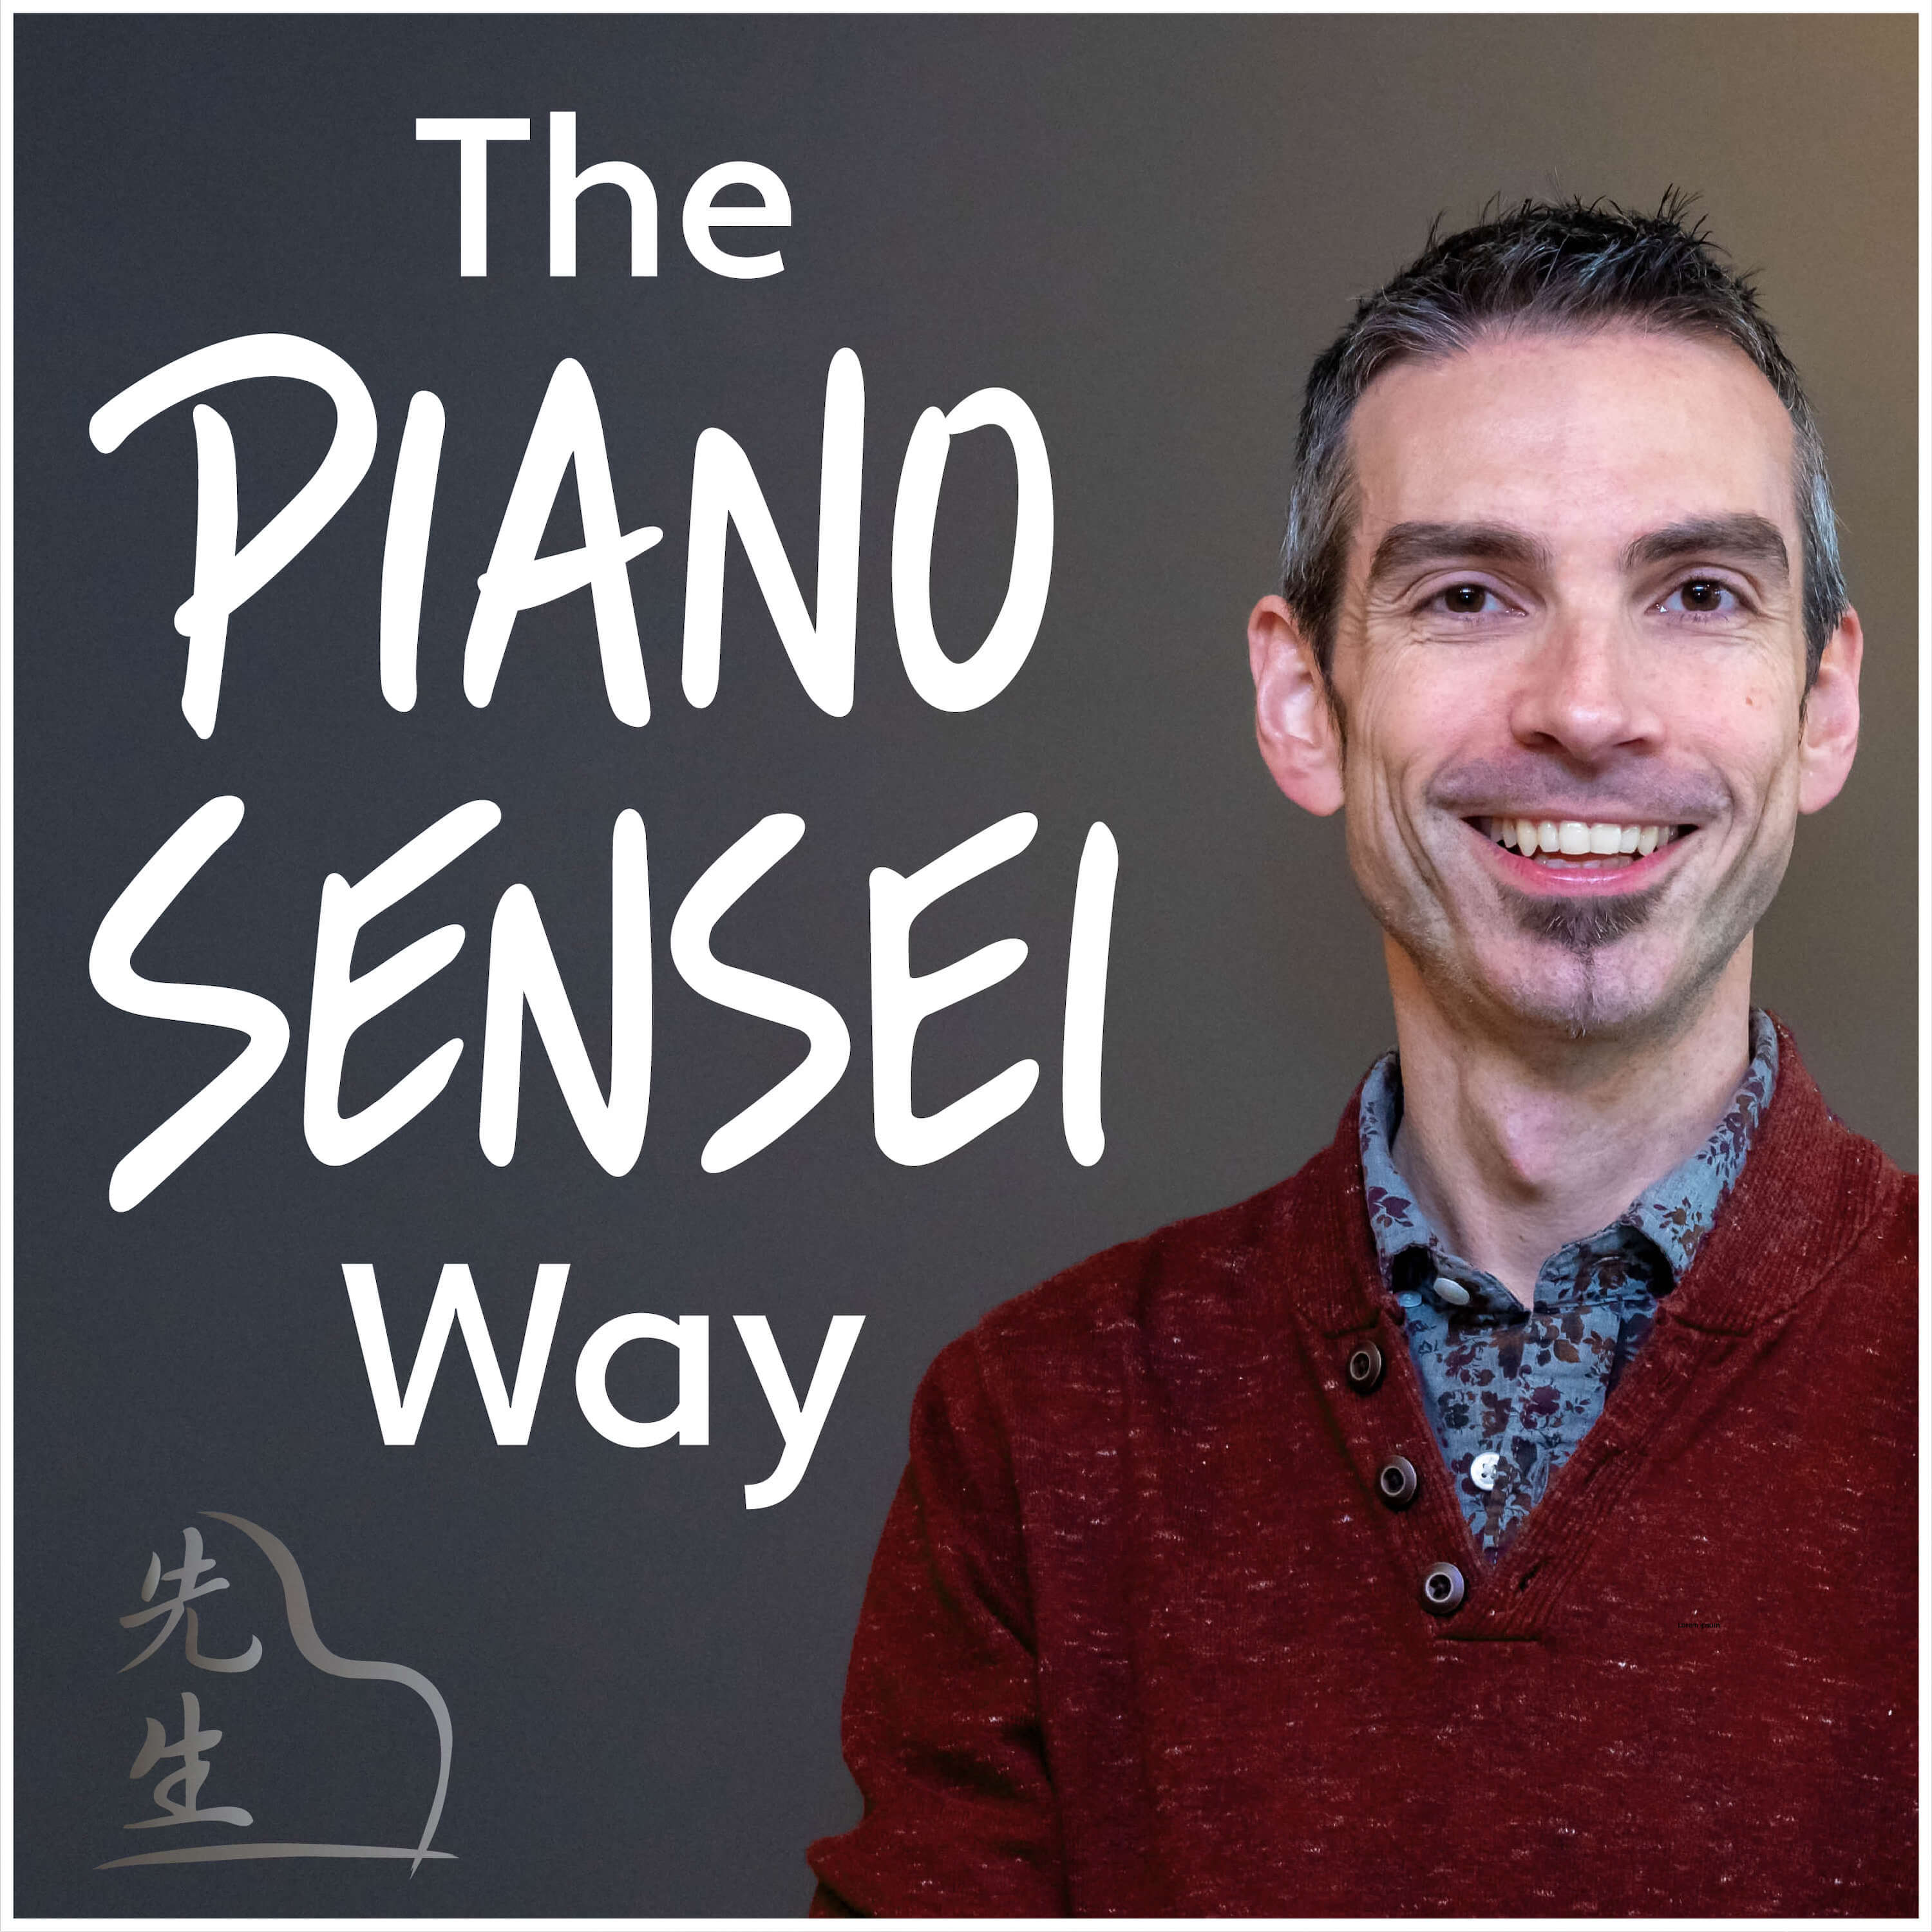 06 The Way to Teach Piano is to Teach Practicing (w/ Michael Richey)